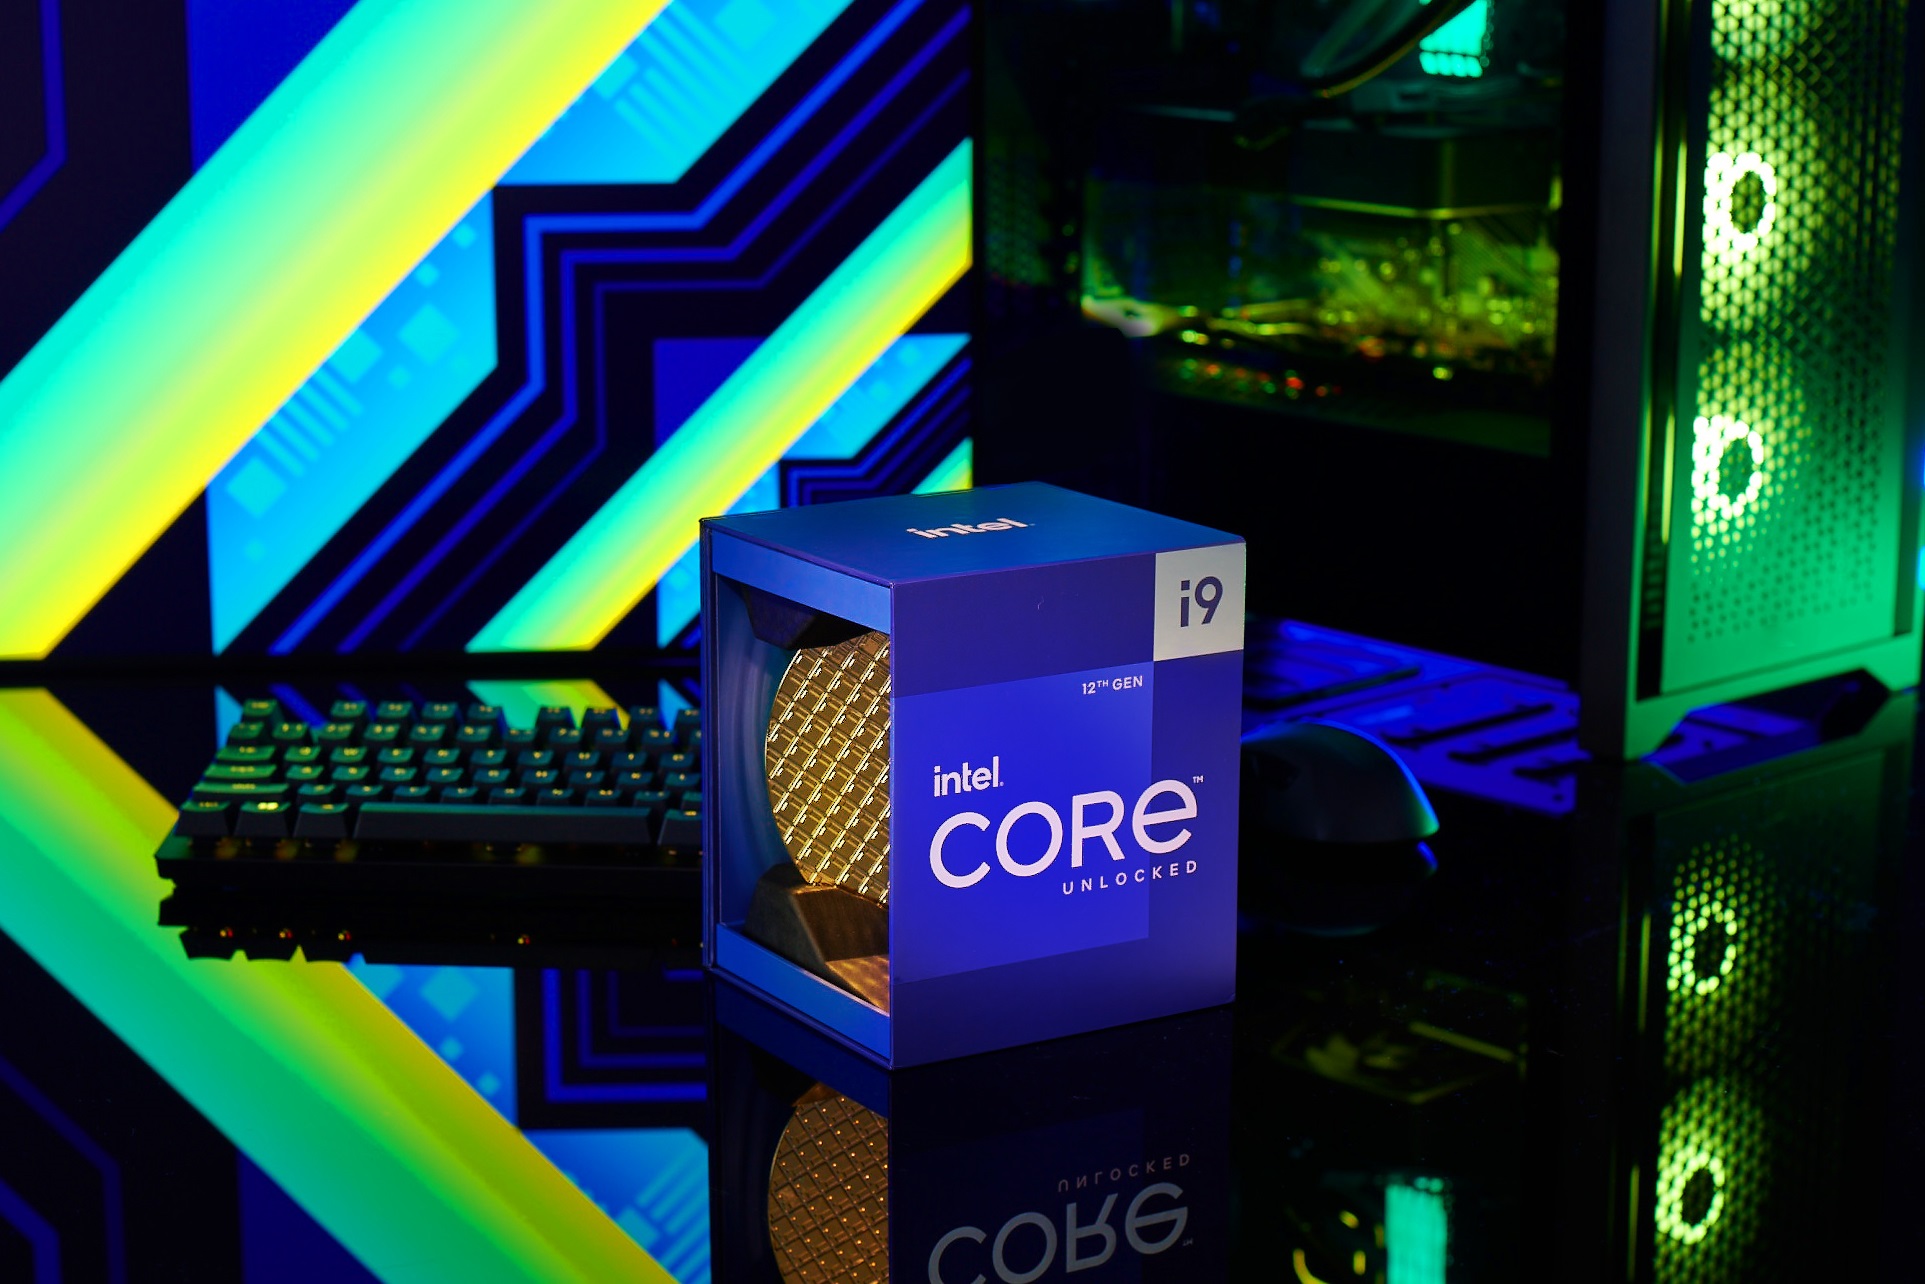 Intel unveiled the 12th Gen Intel Core processor family with the launch of six new unlocked desktop processors, including the world’s best gaming processor, the 12th Gen Intel Core i9-12900K. They were introduced Oct. 27, 2021. (Credit: Intel Corporation)